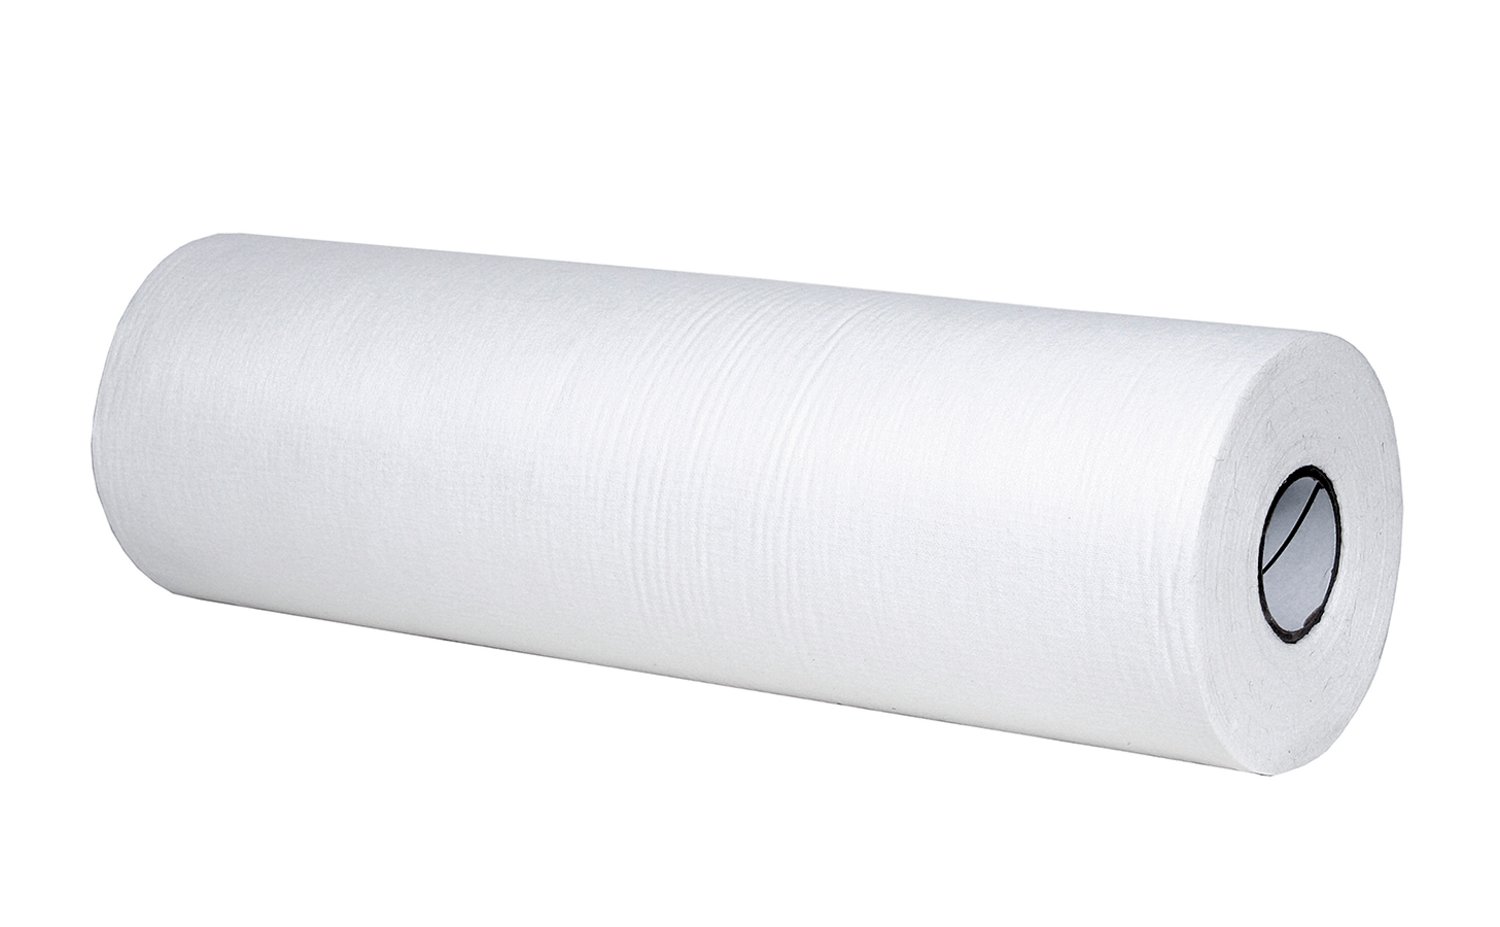 7000000528 - 3M Dirt Trap Protection Material, 36852, White, 28 in x 300 ft, 1 roll
per case